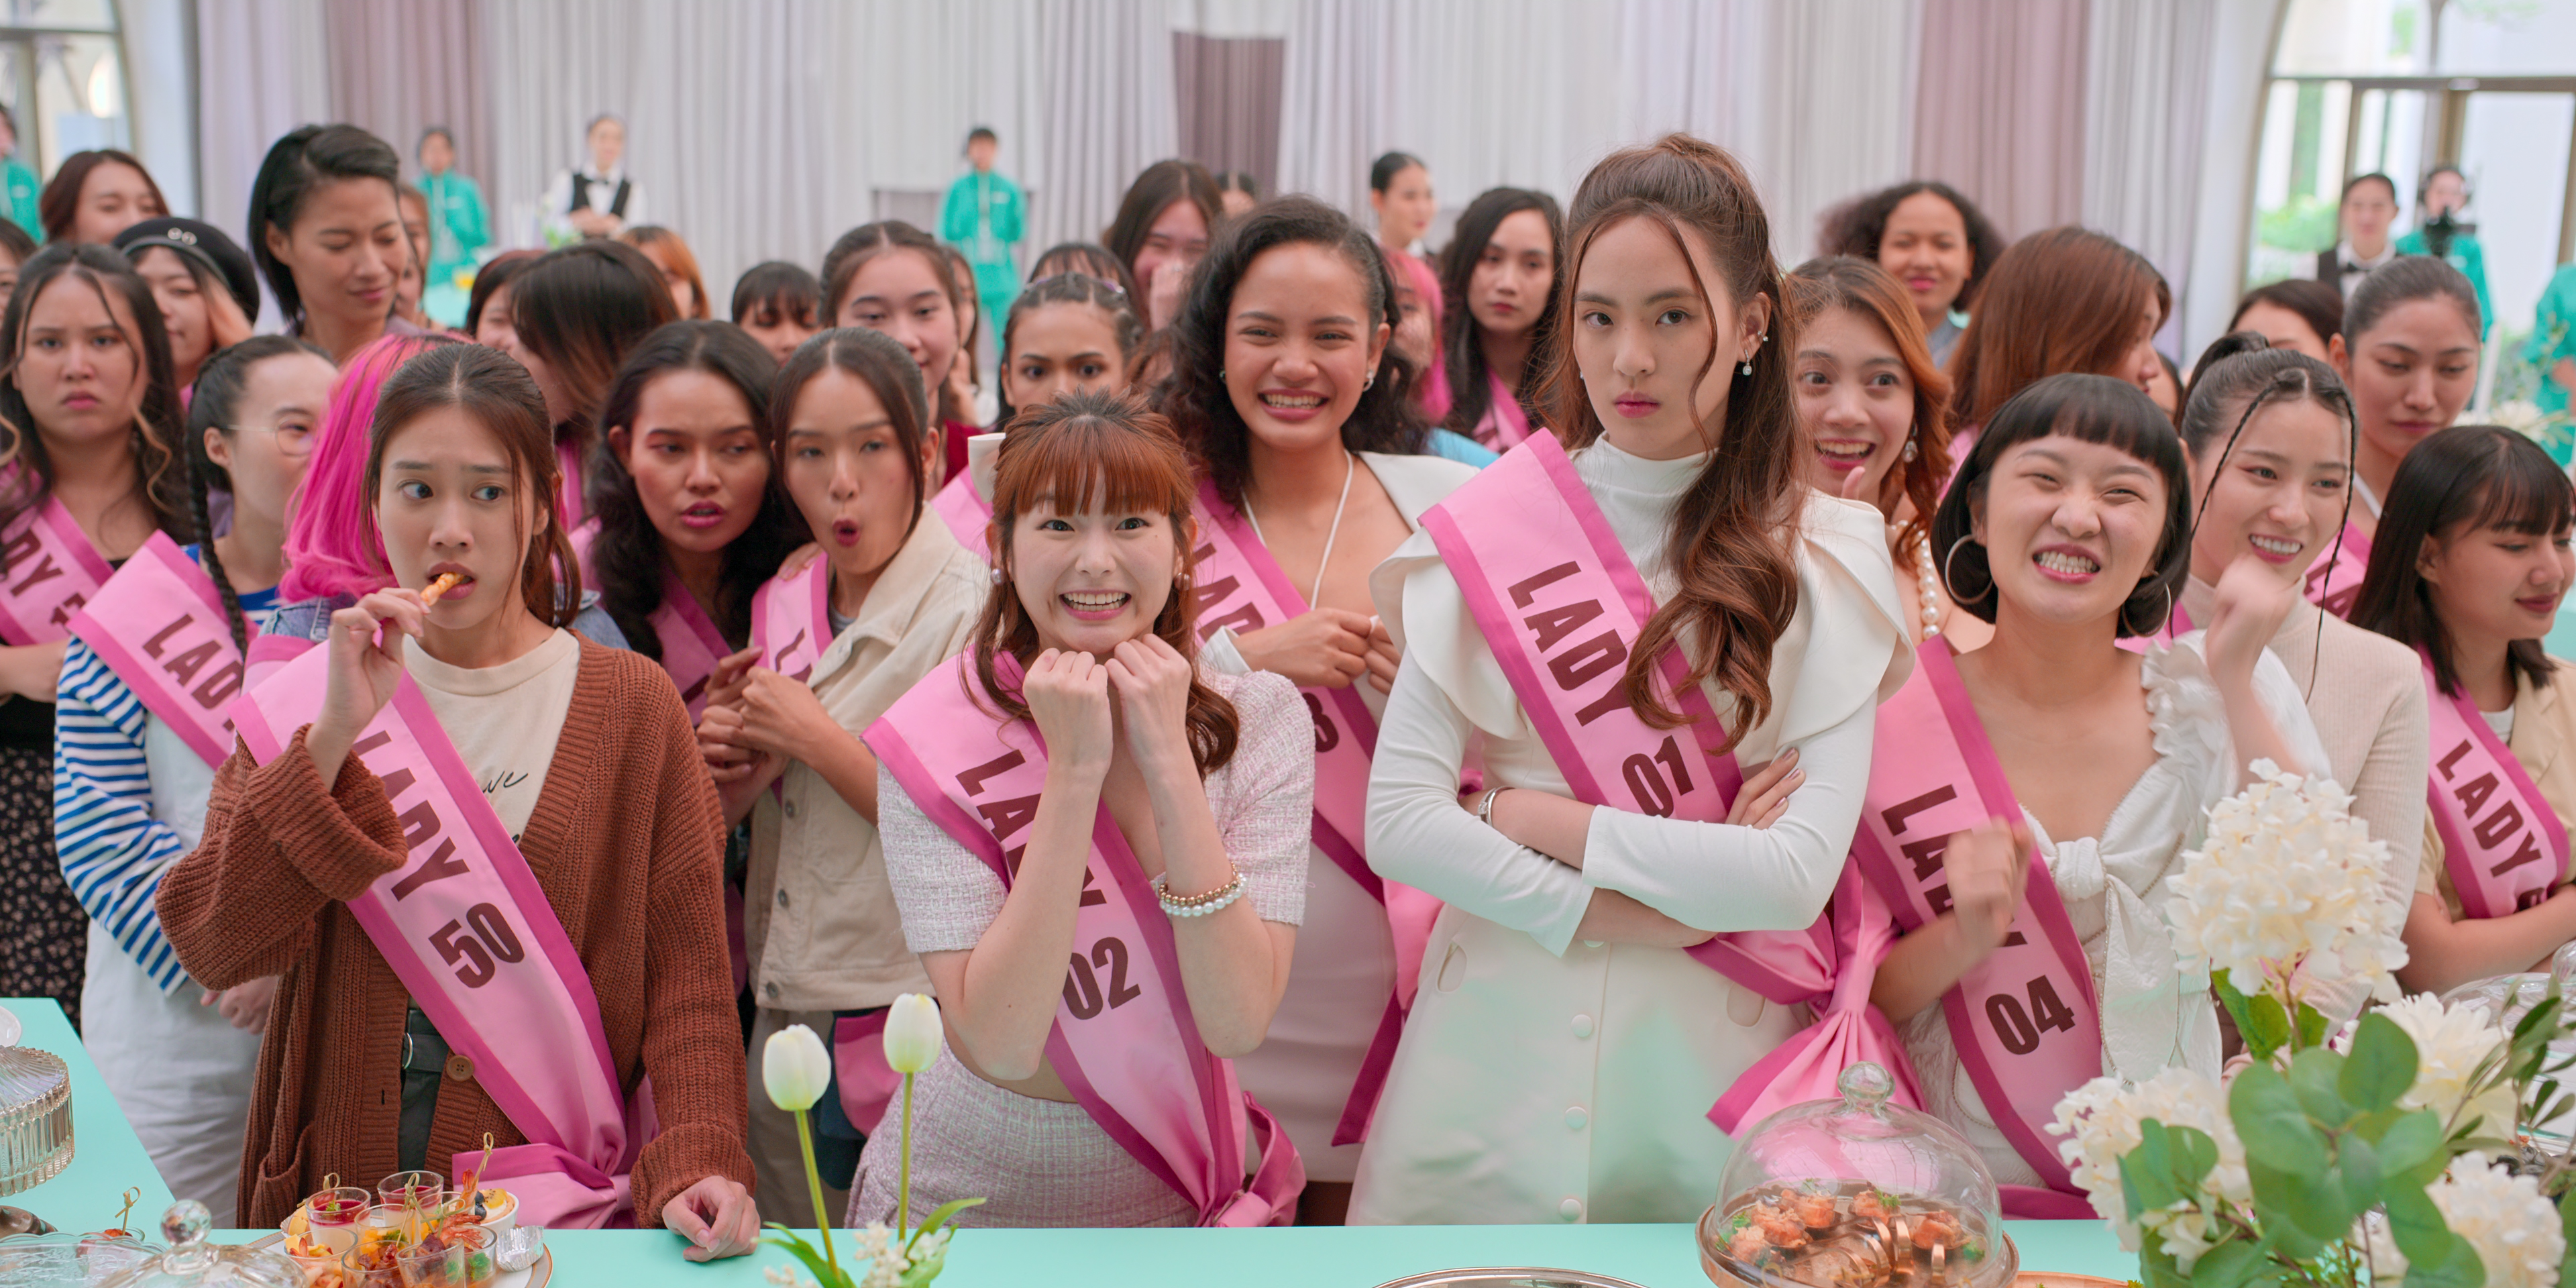 Love is a Game: Colorful Thai Rom-Com 'Ready, Set, Love' Premieres